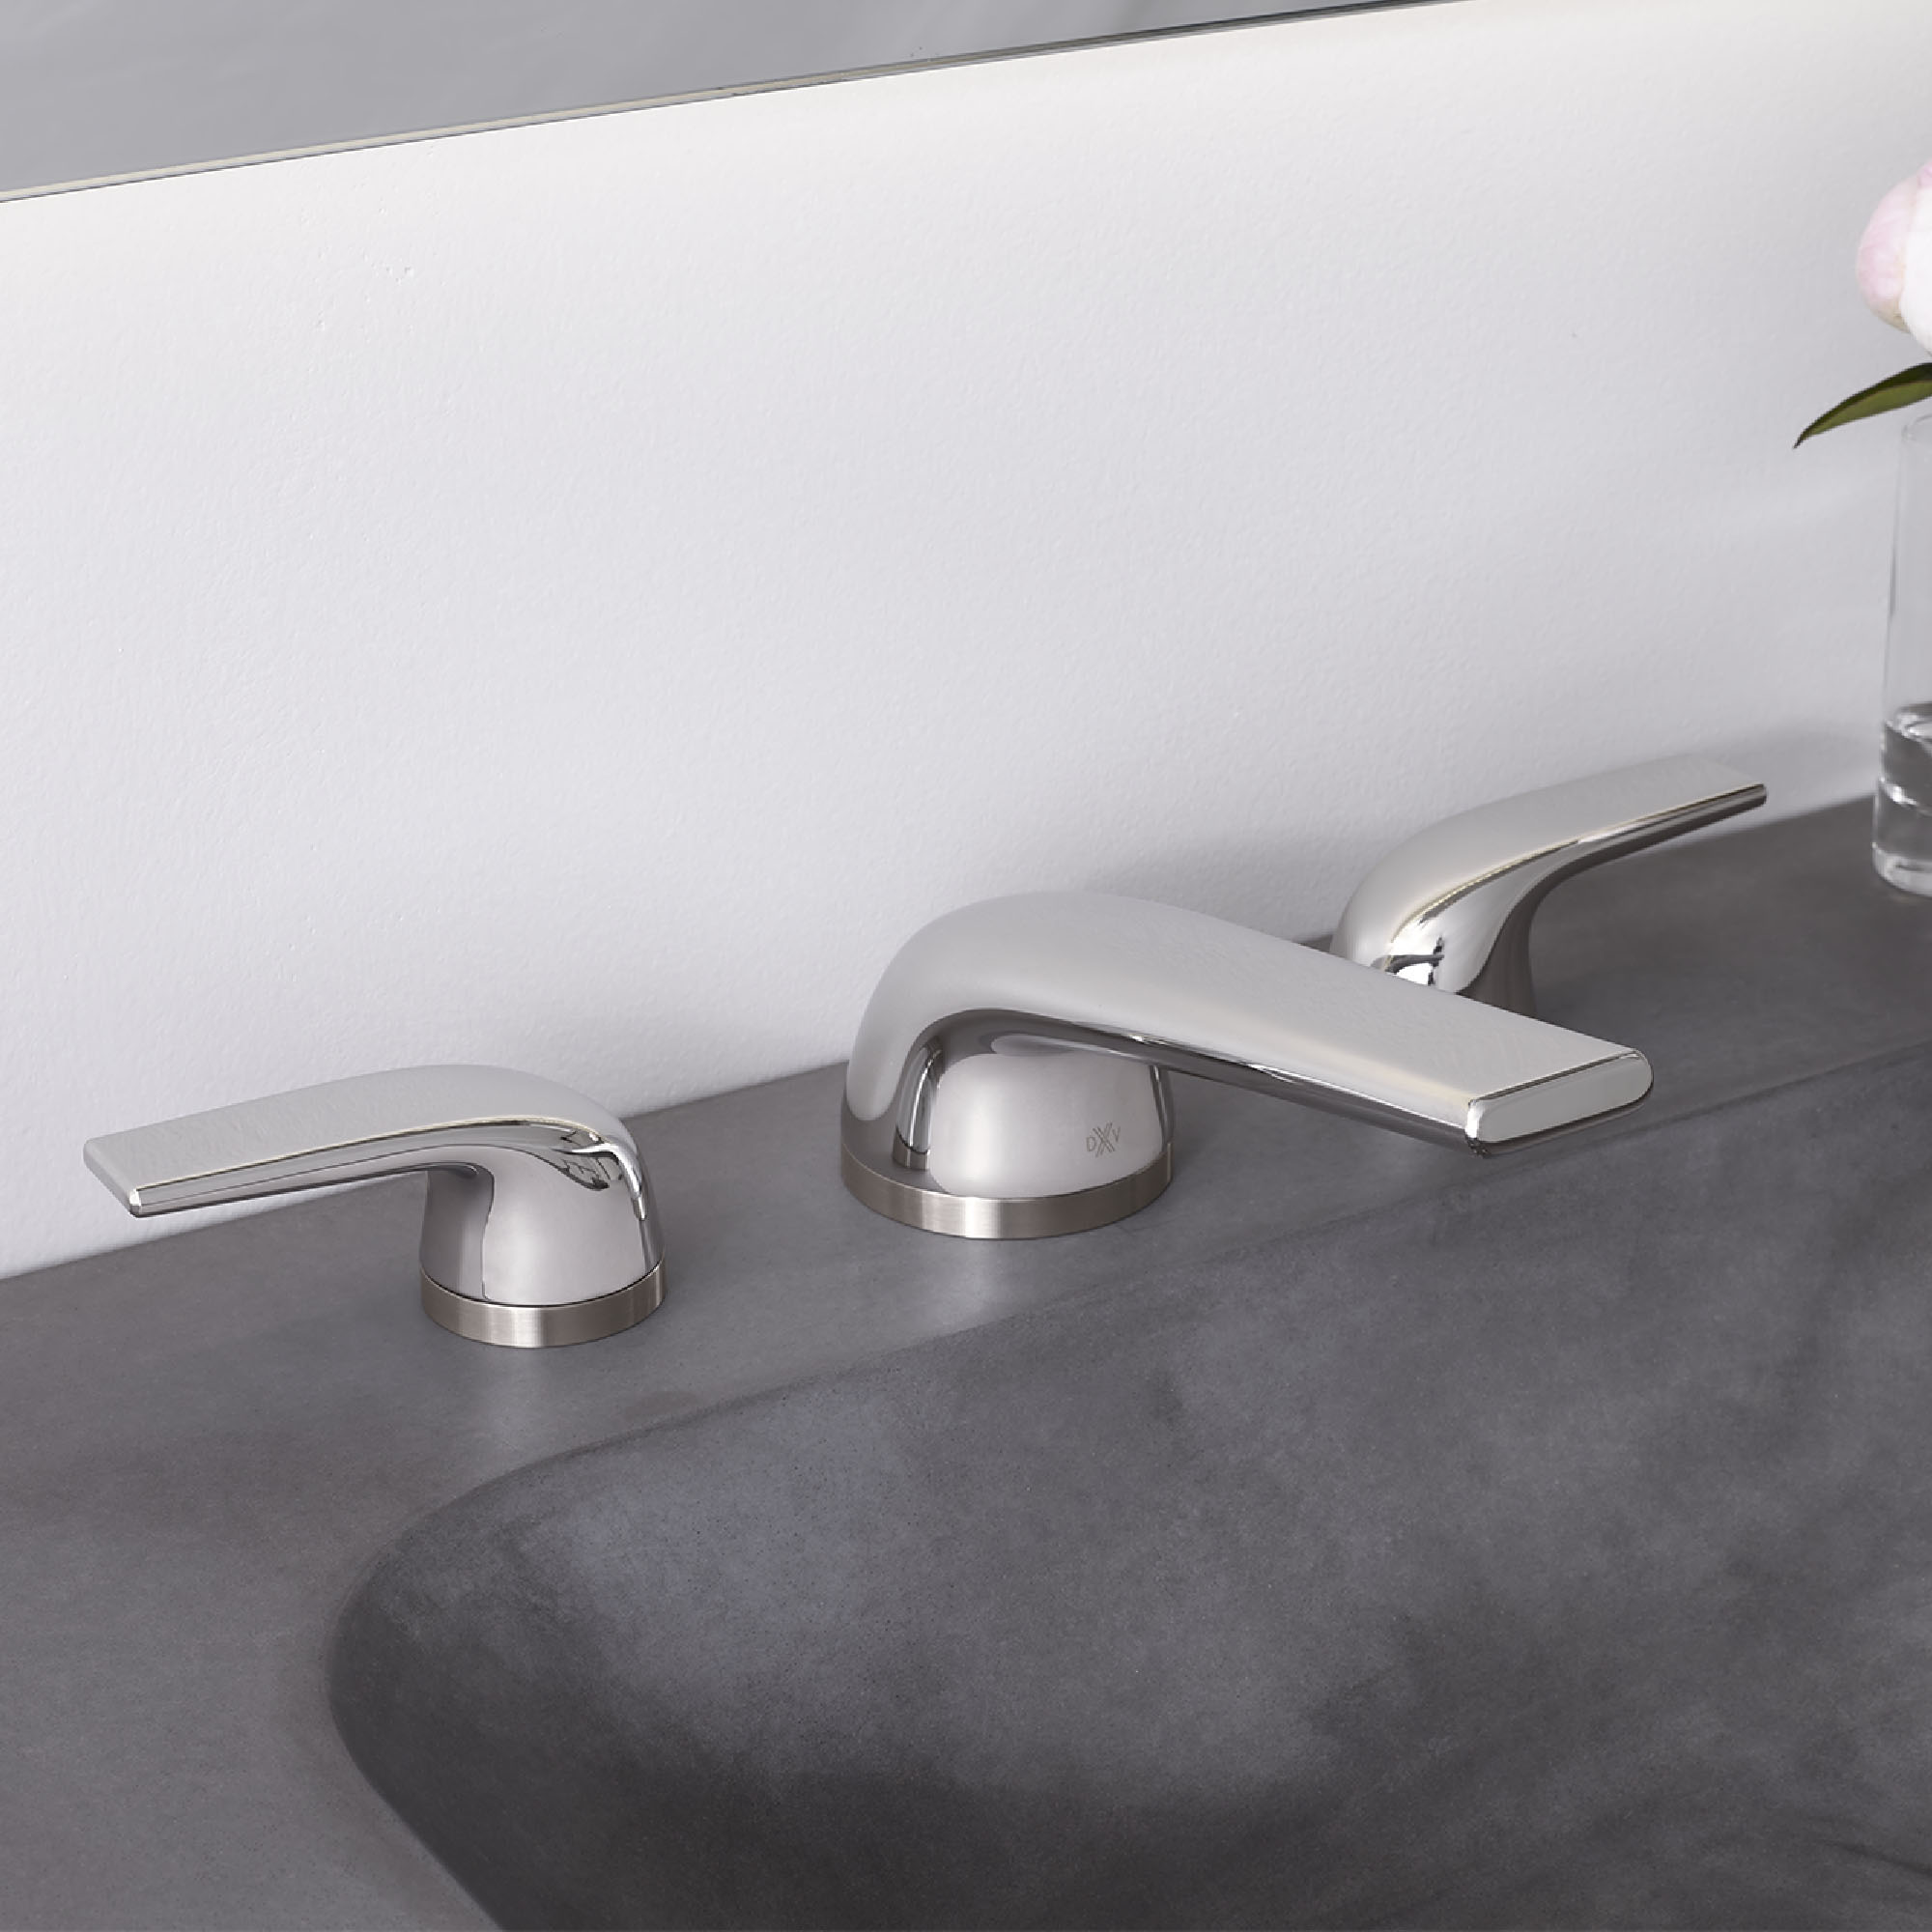 DXV Modulus® Concrete Above Counter Sink, 3-Hole